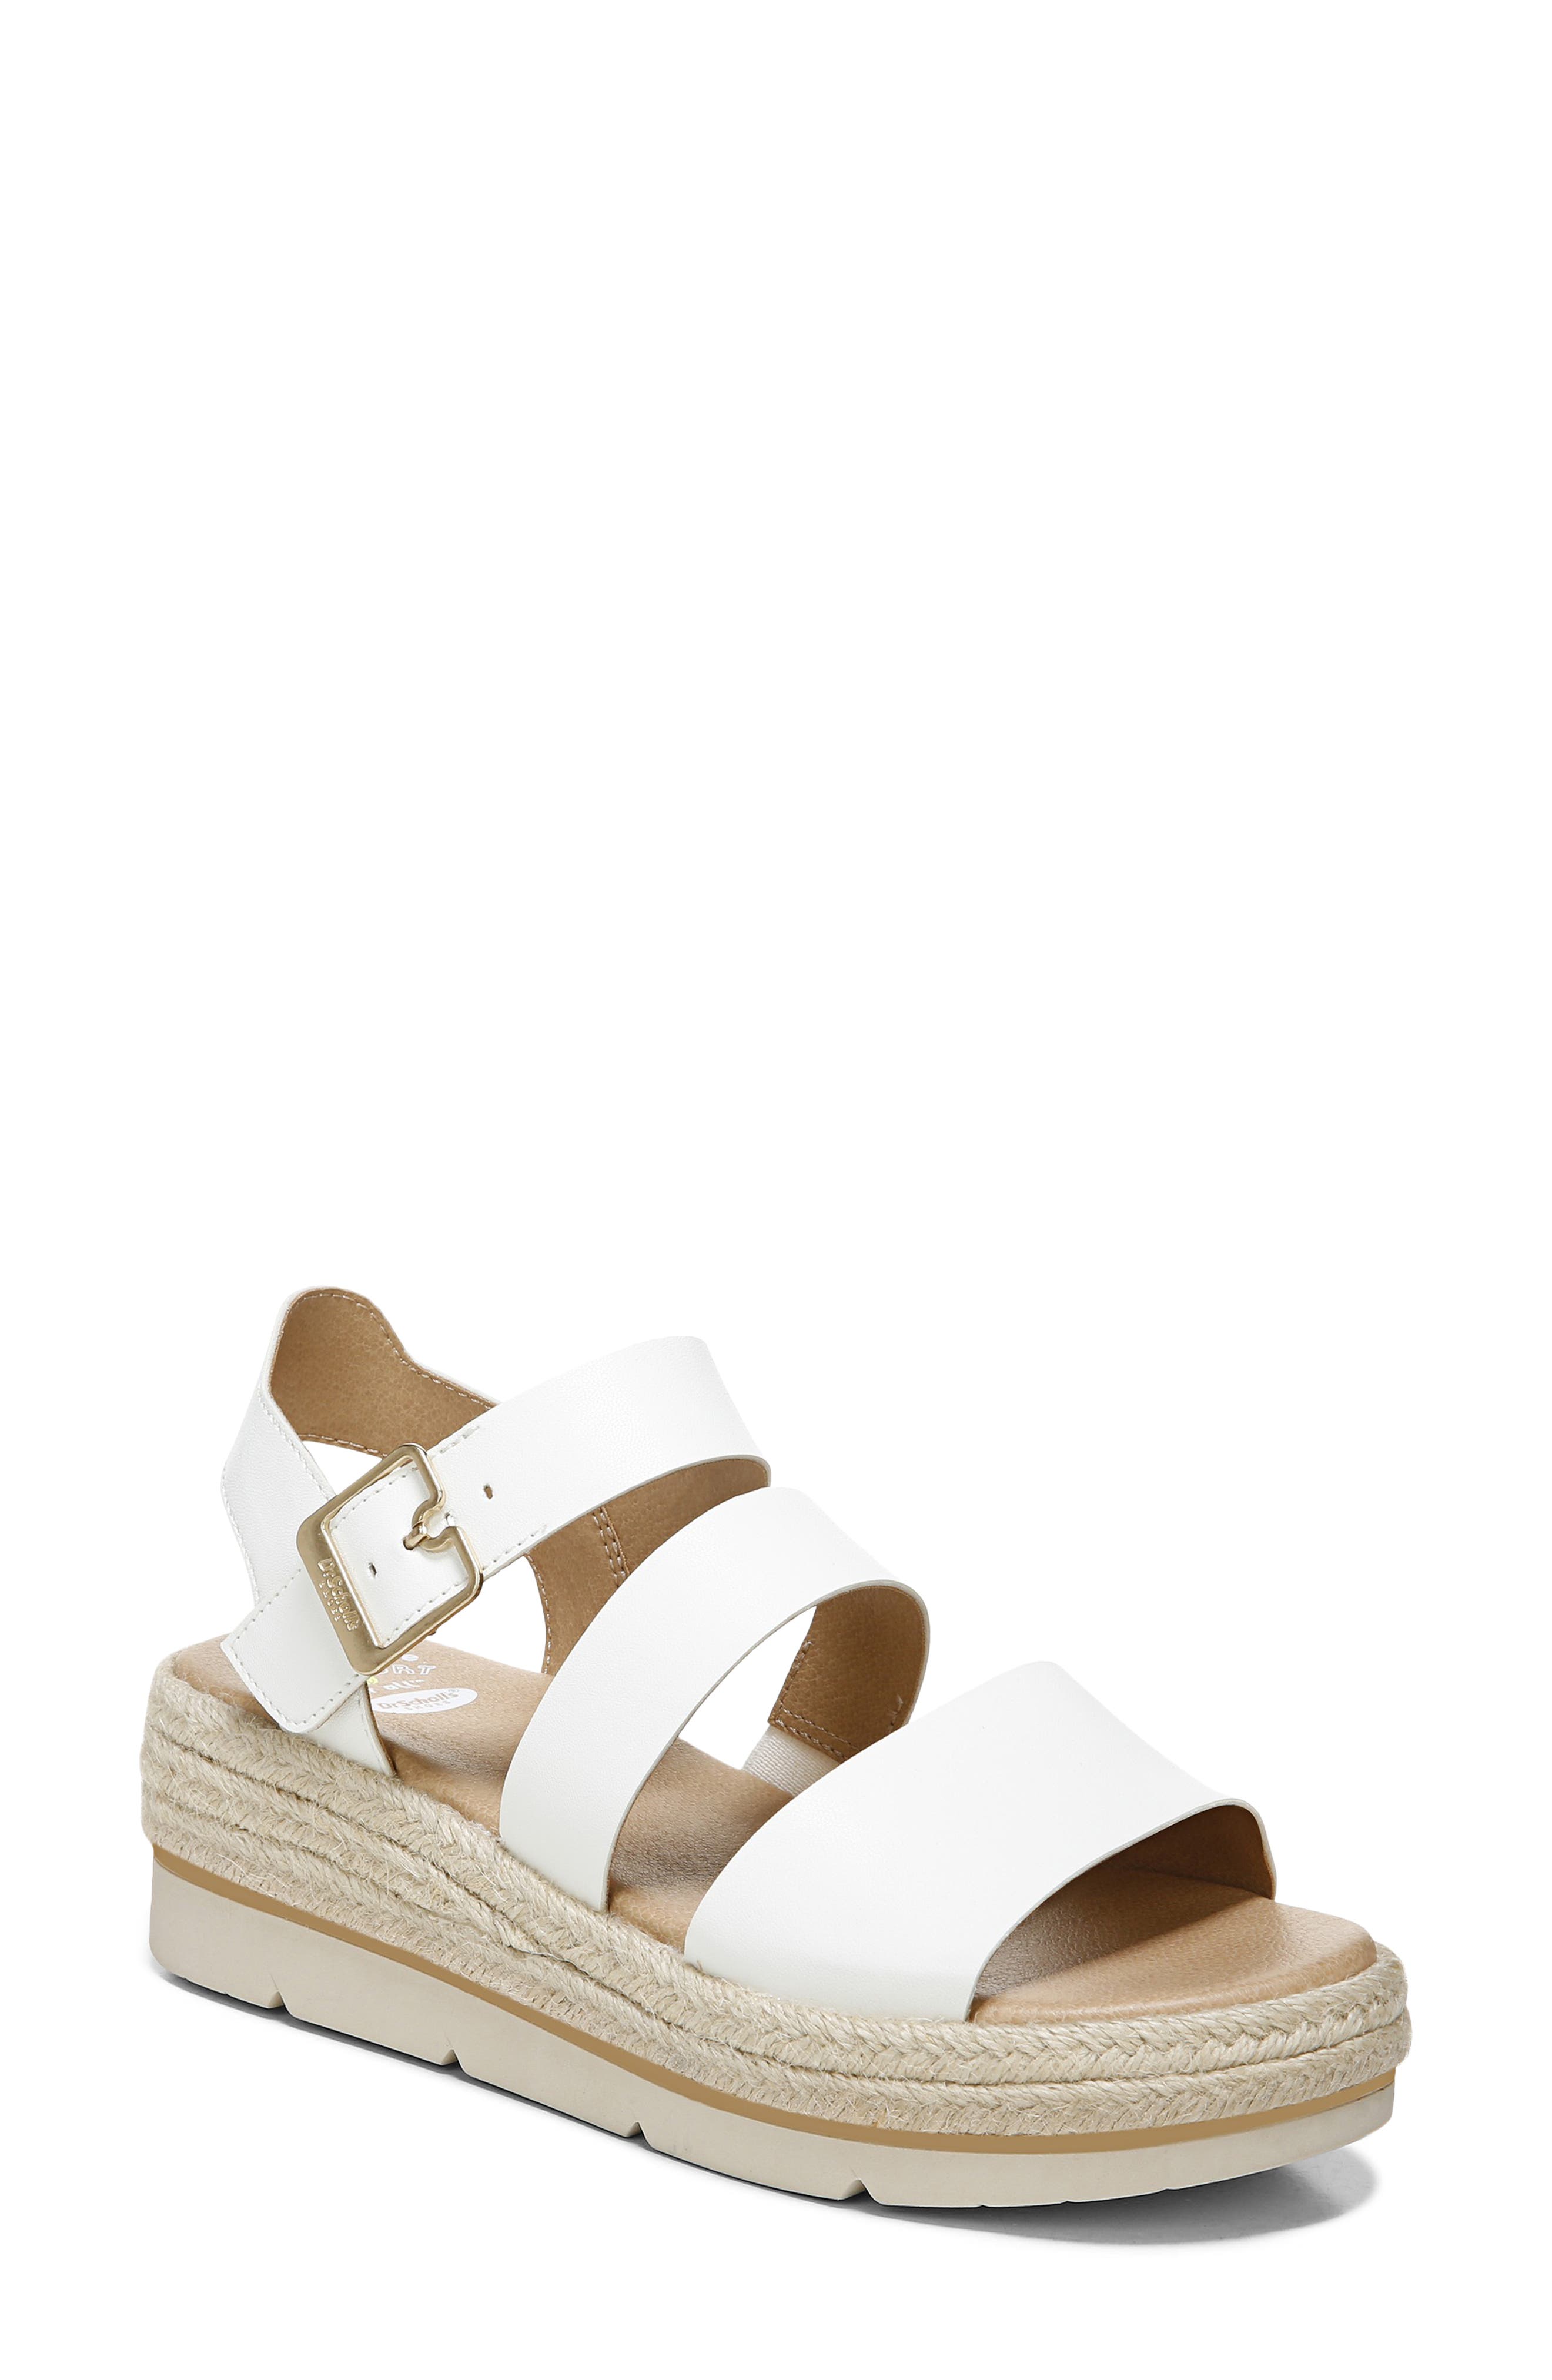 Dr. Scholl's Once Twice Espadrille Sandal in White